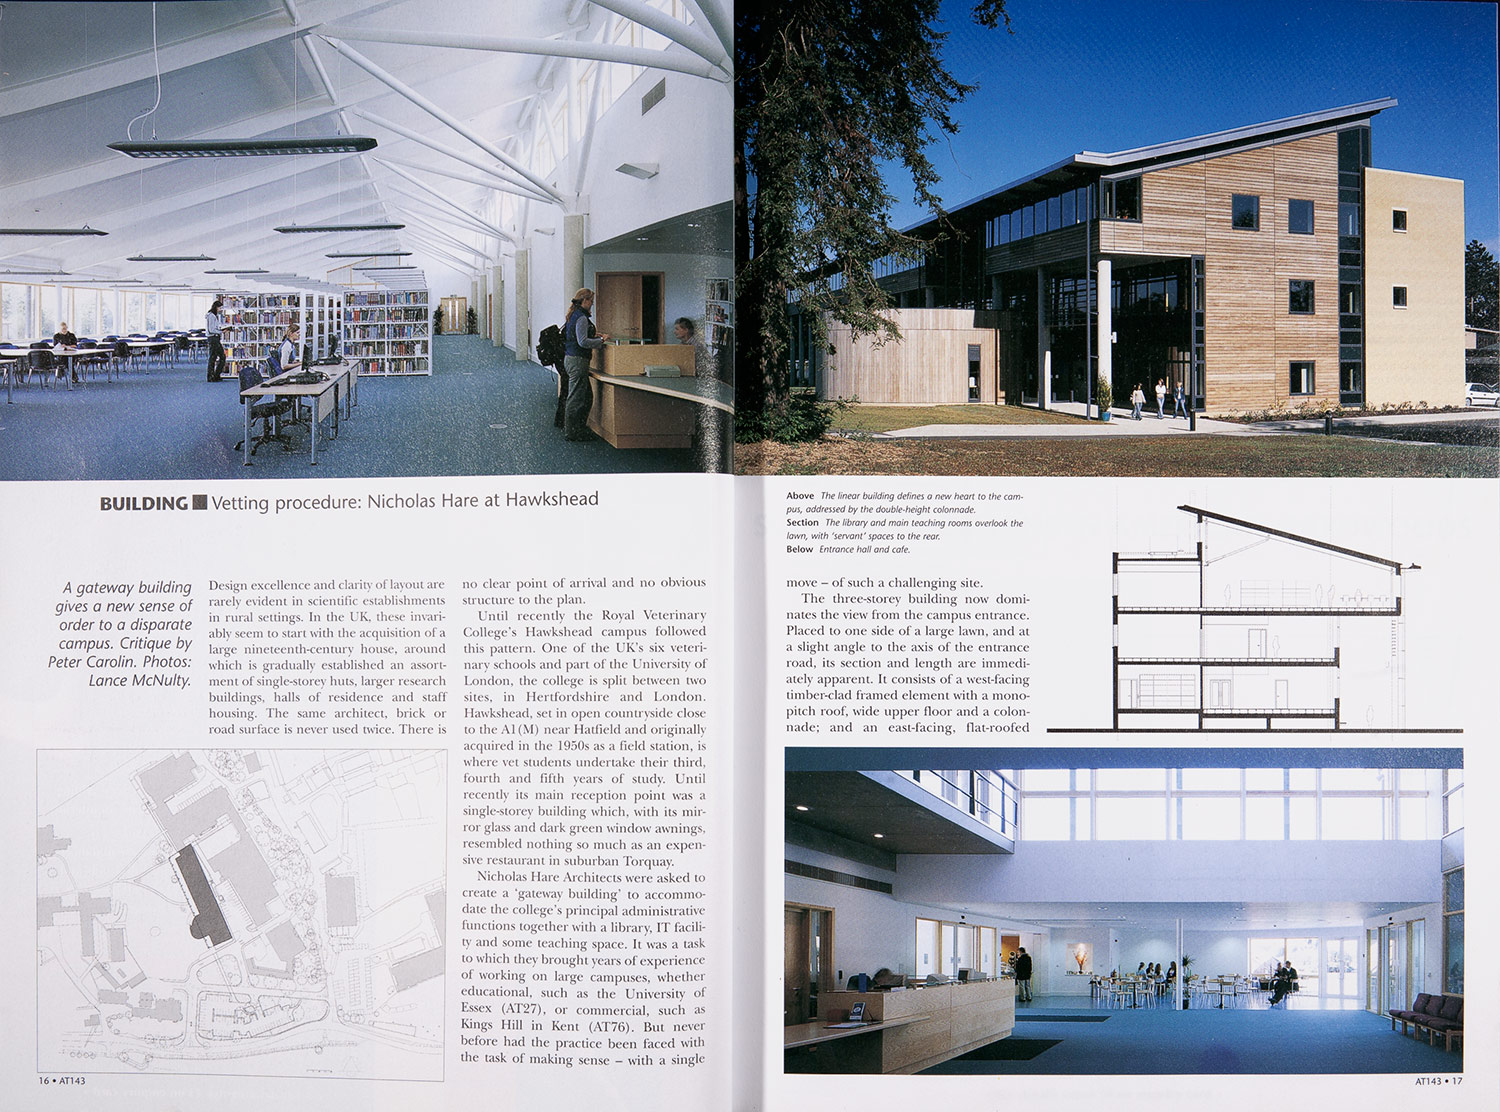 Architecture Today - The Royal Veterinary College